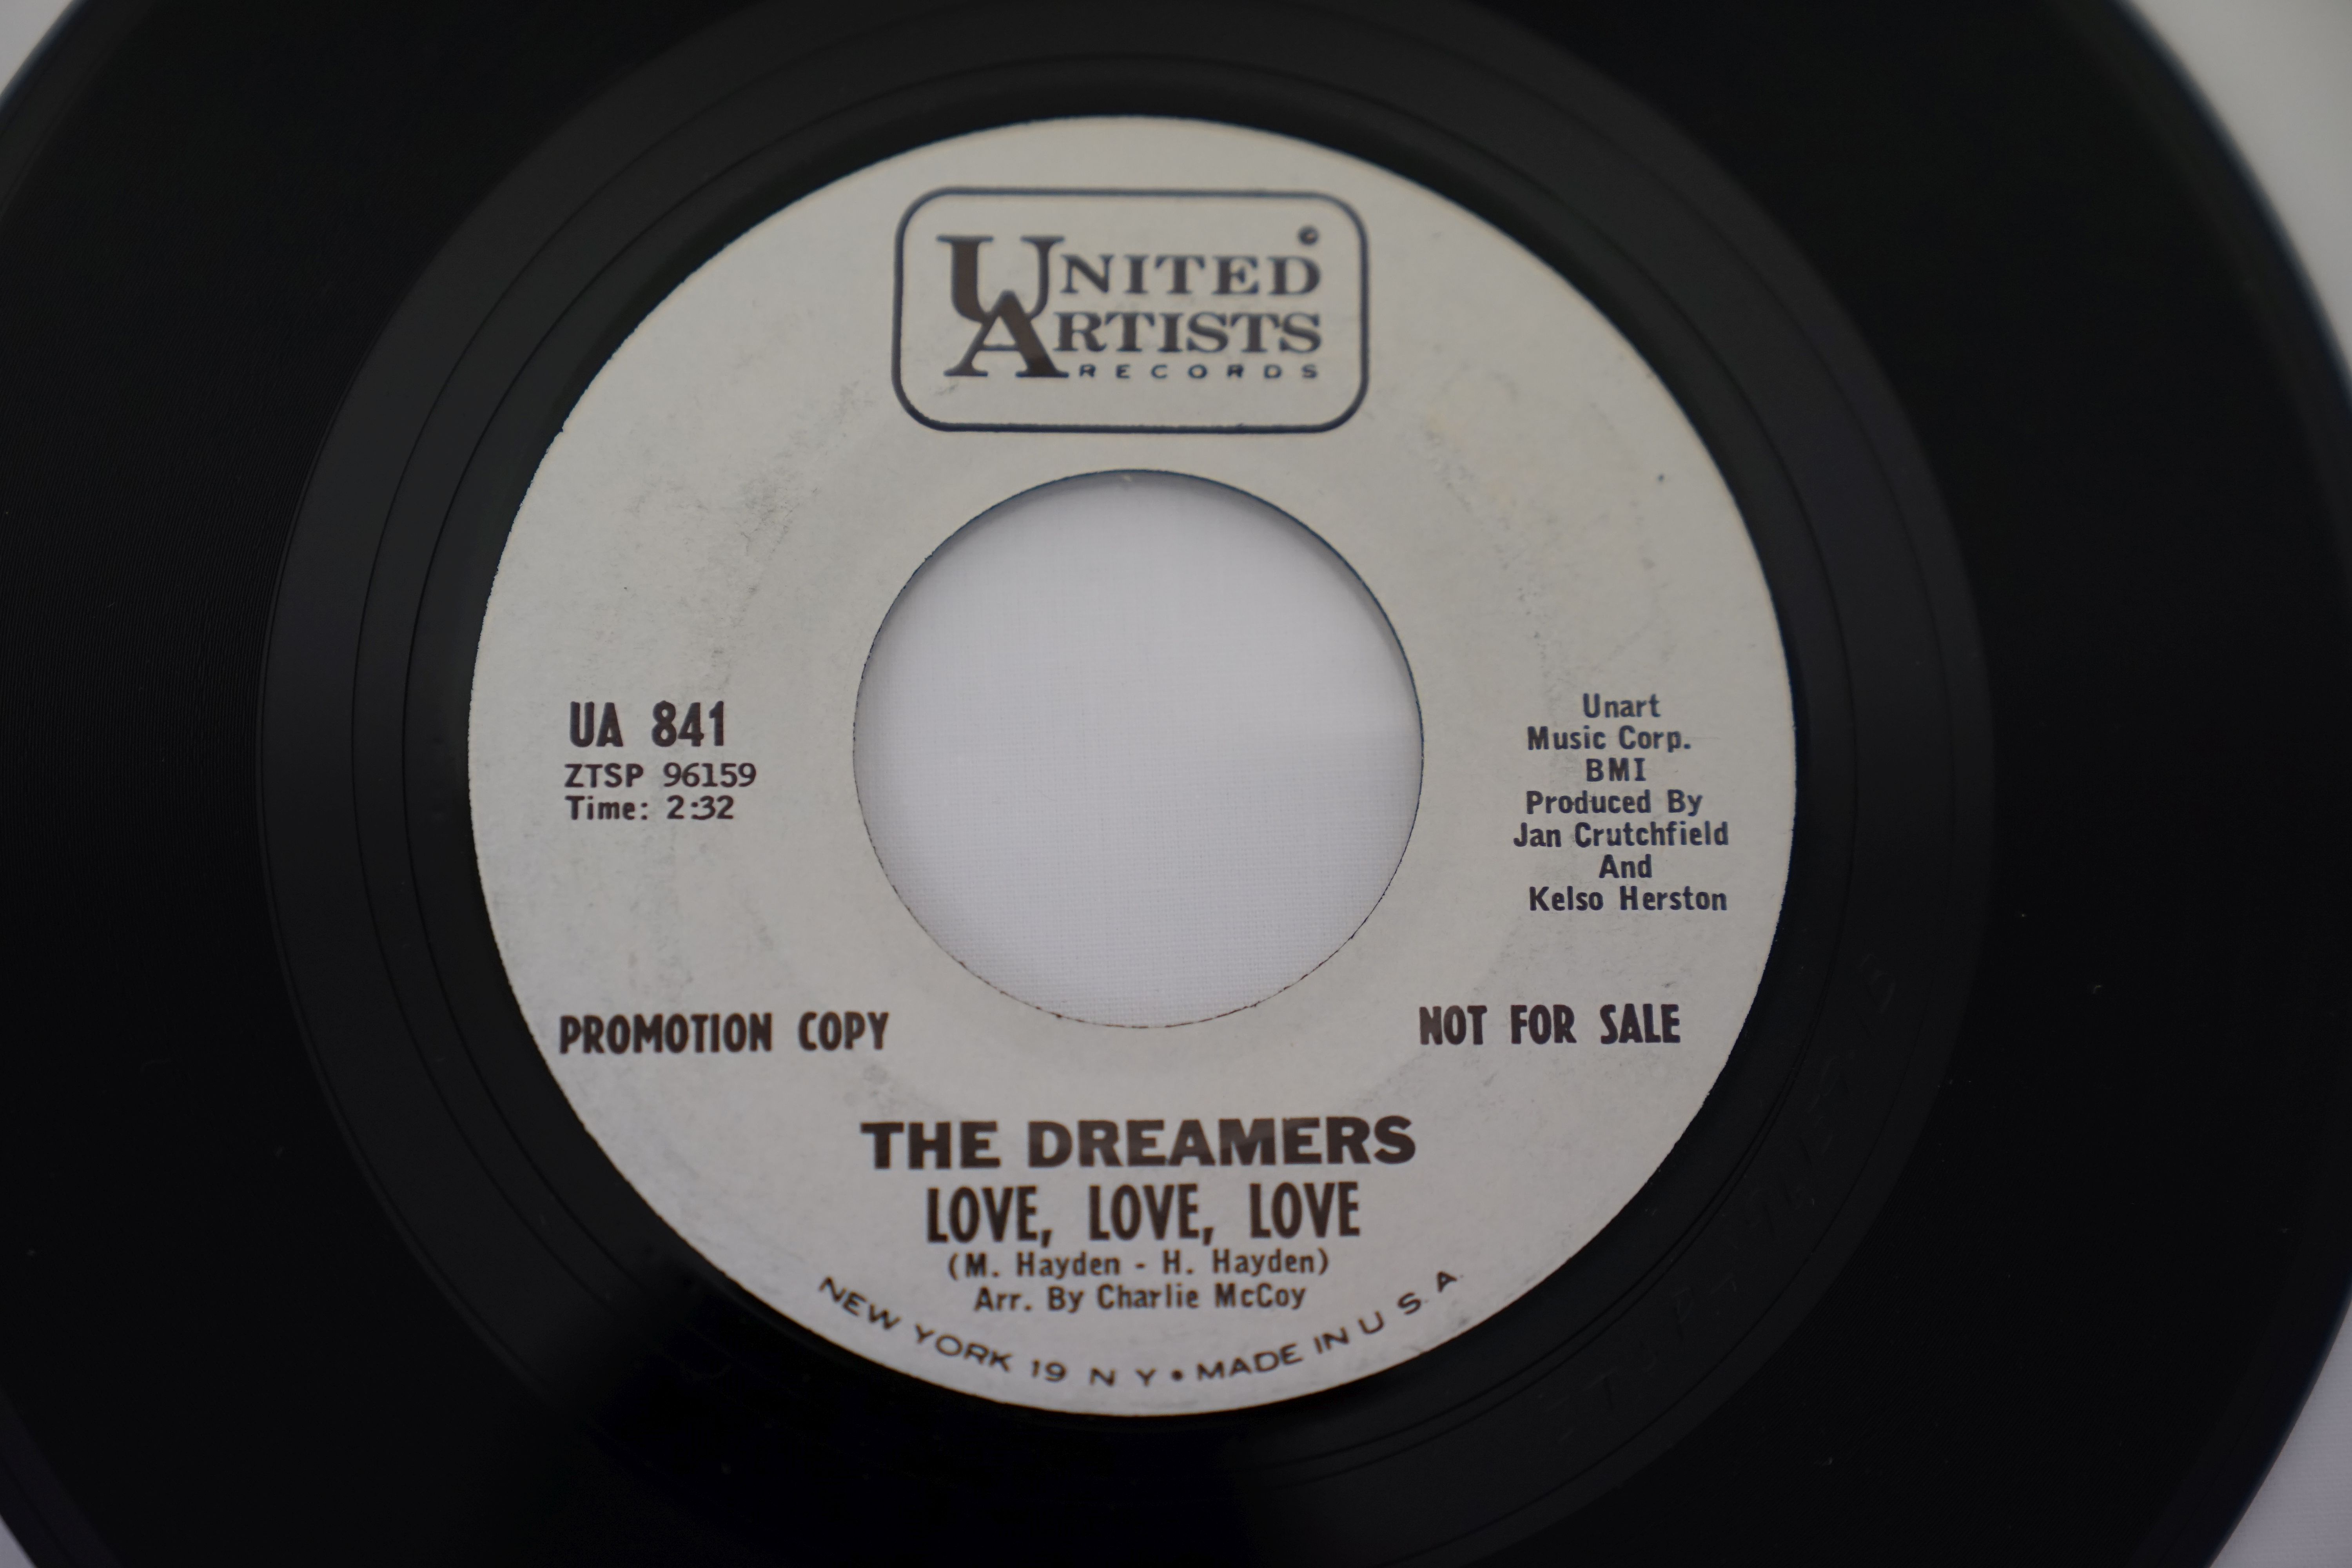 Vinyl - 5 rare original US 1st pressing Northern Soul Promo copies on United Artists Records. - Image 20 of 22